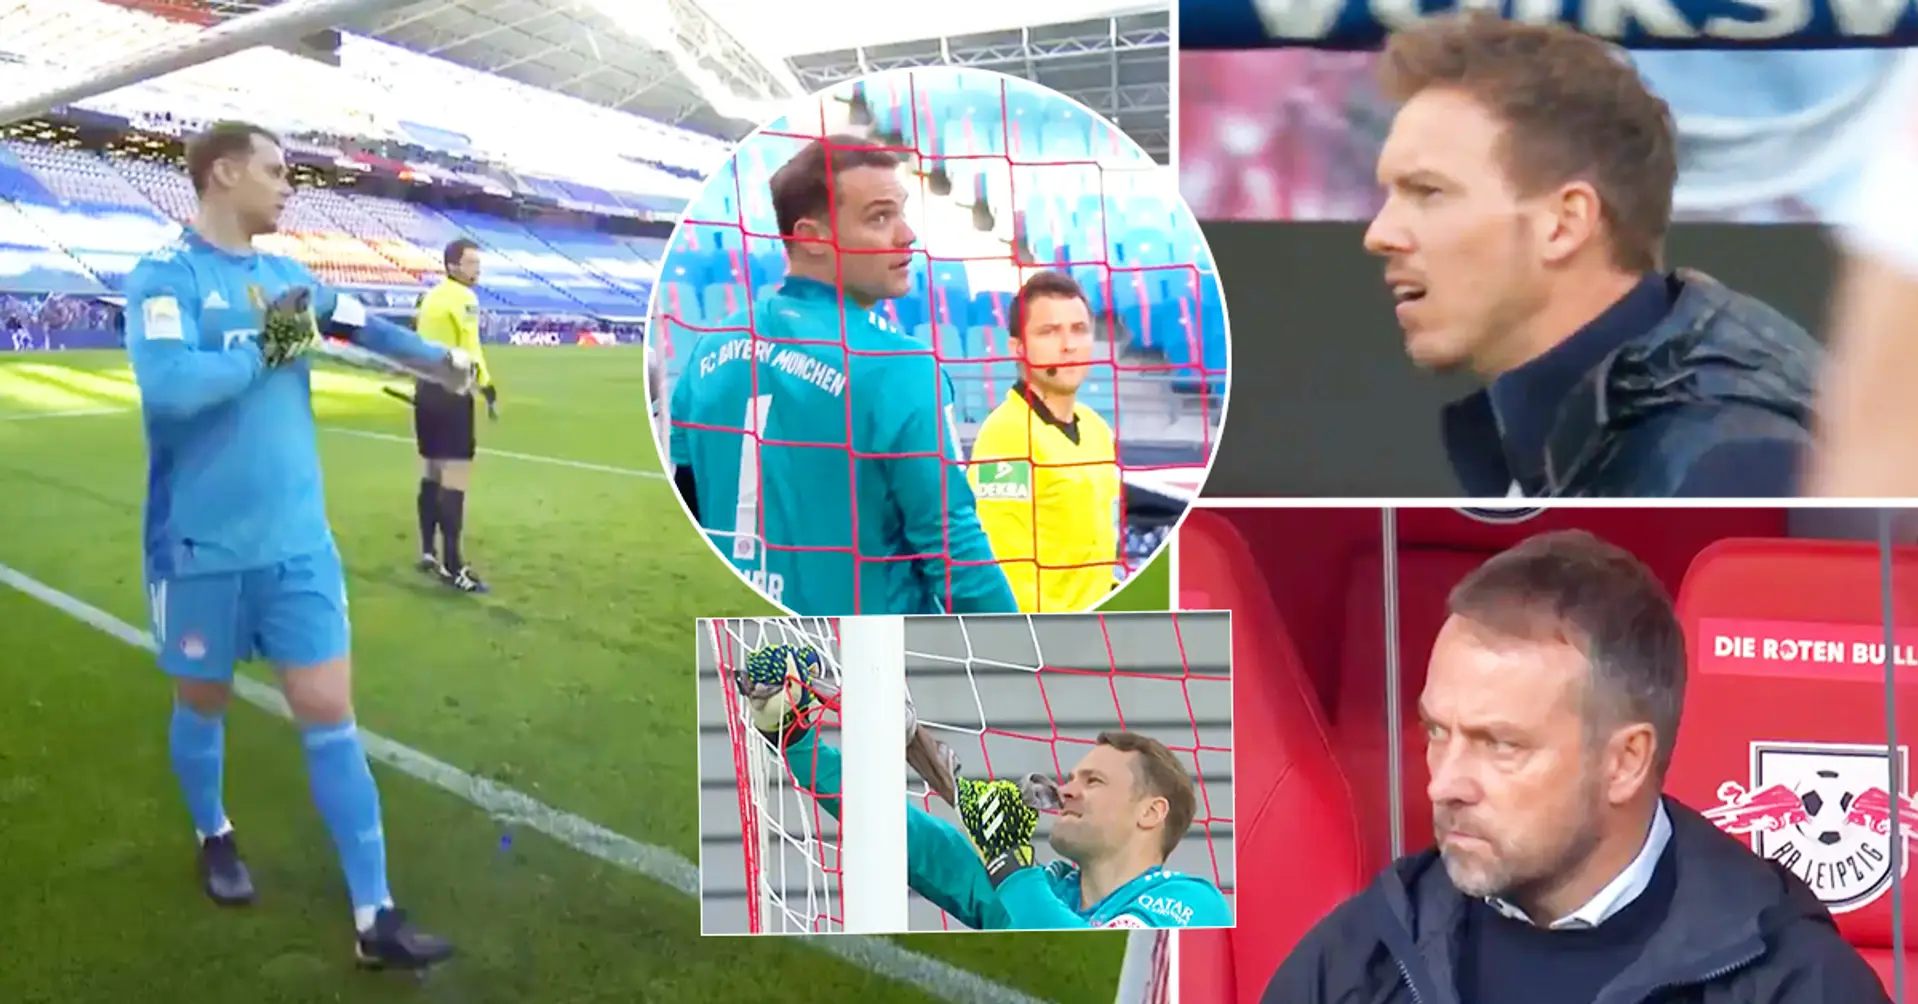 Manuel Neuer surpsises both coaches and referee when he tries to fix a net right before match